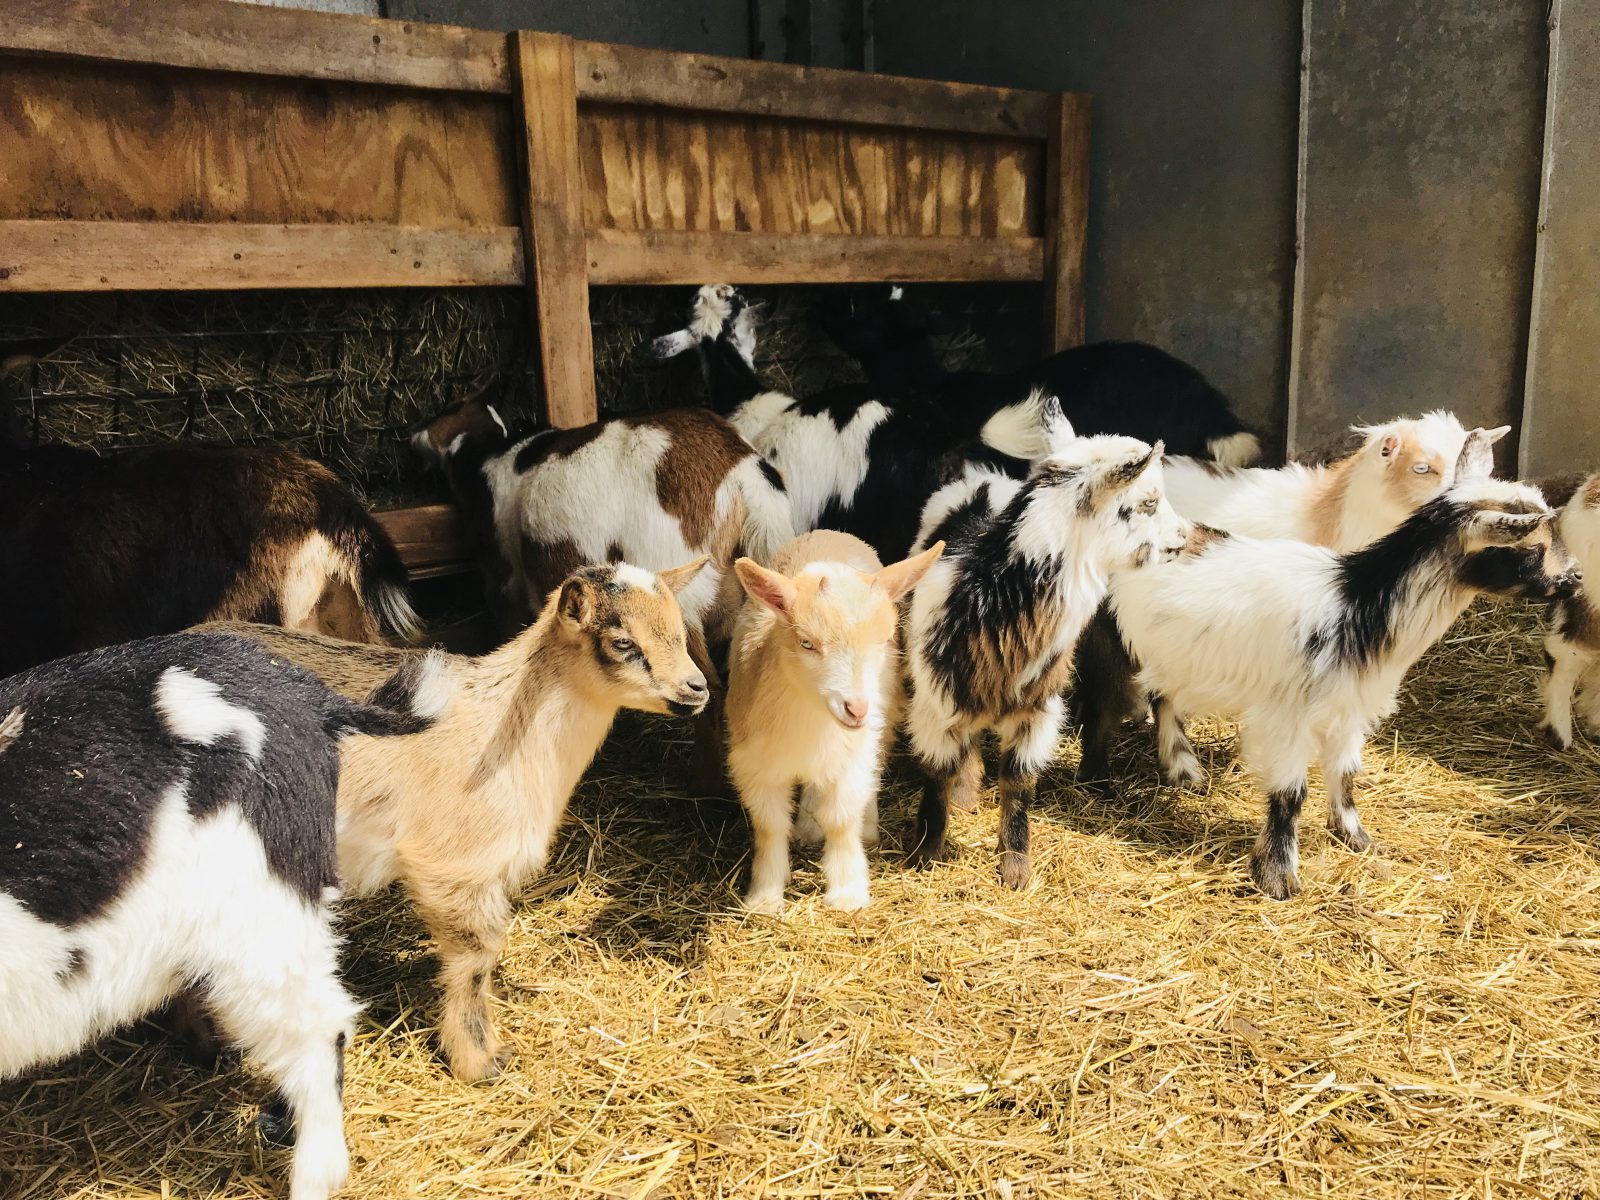 A lot of tiny goats gathered in the barn.